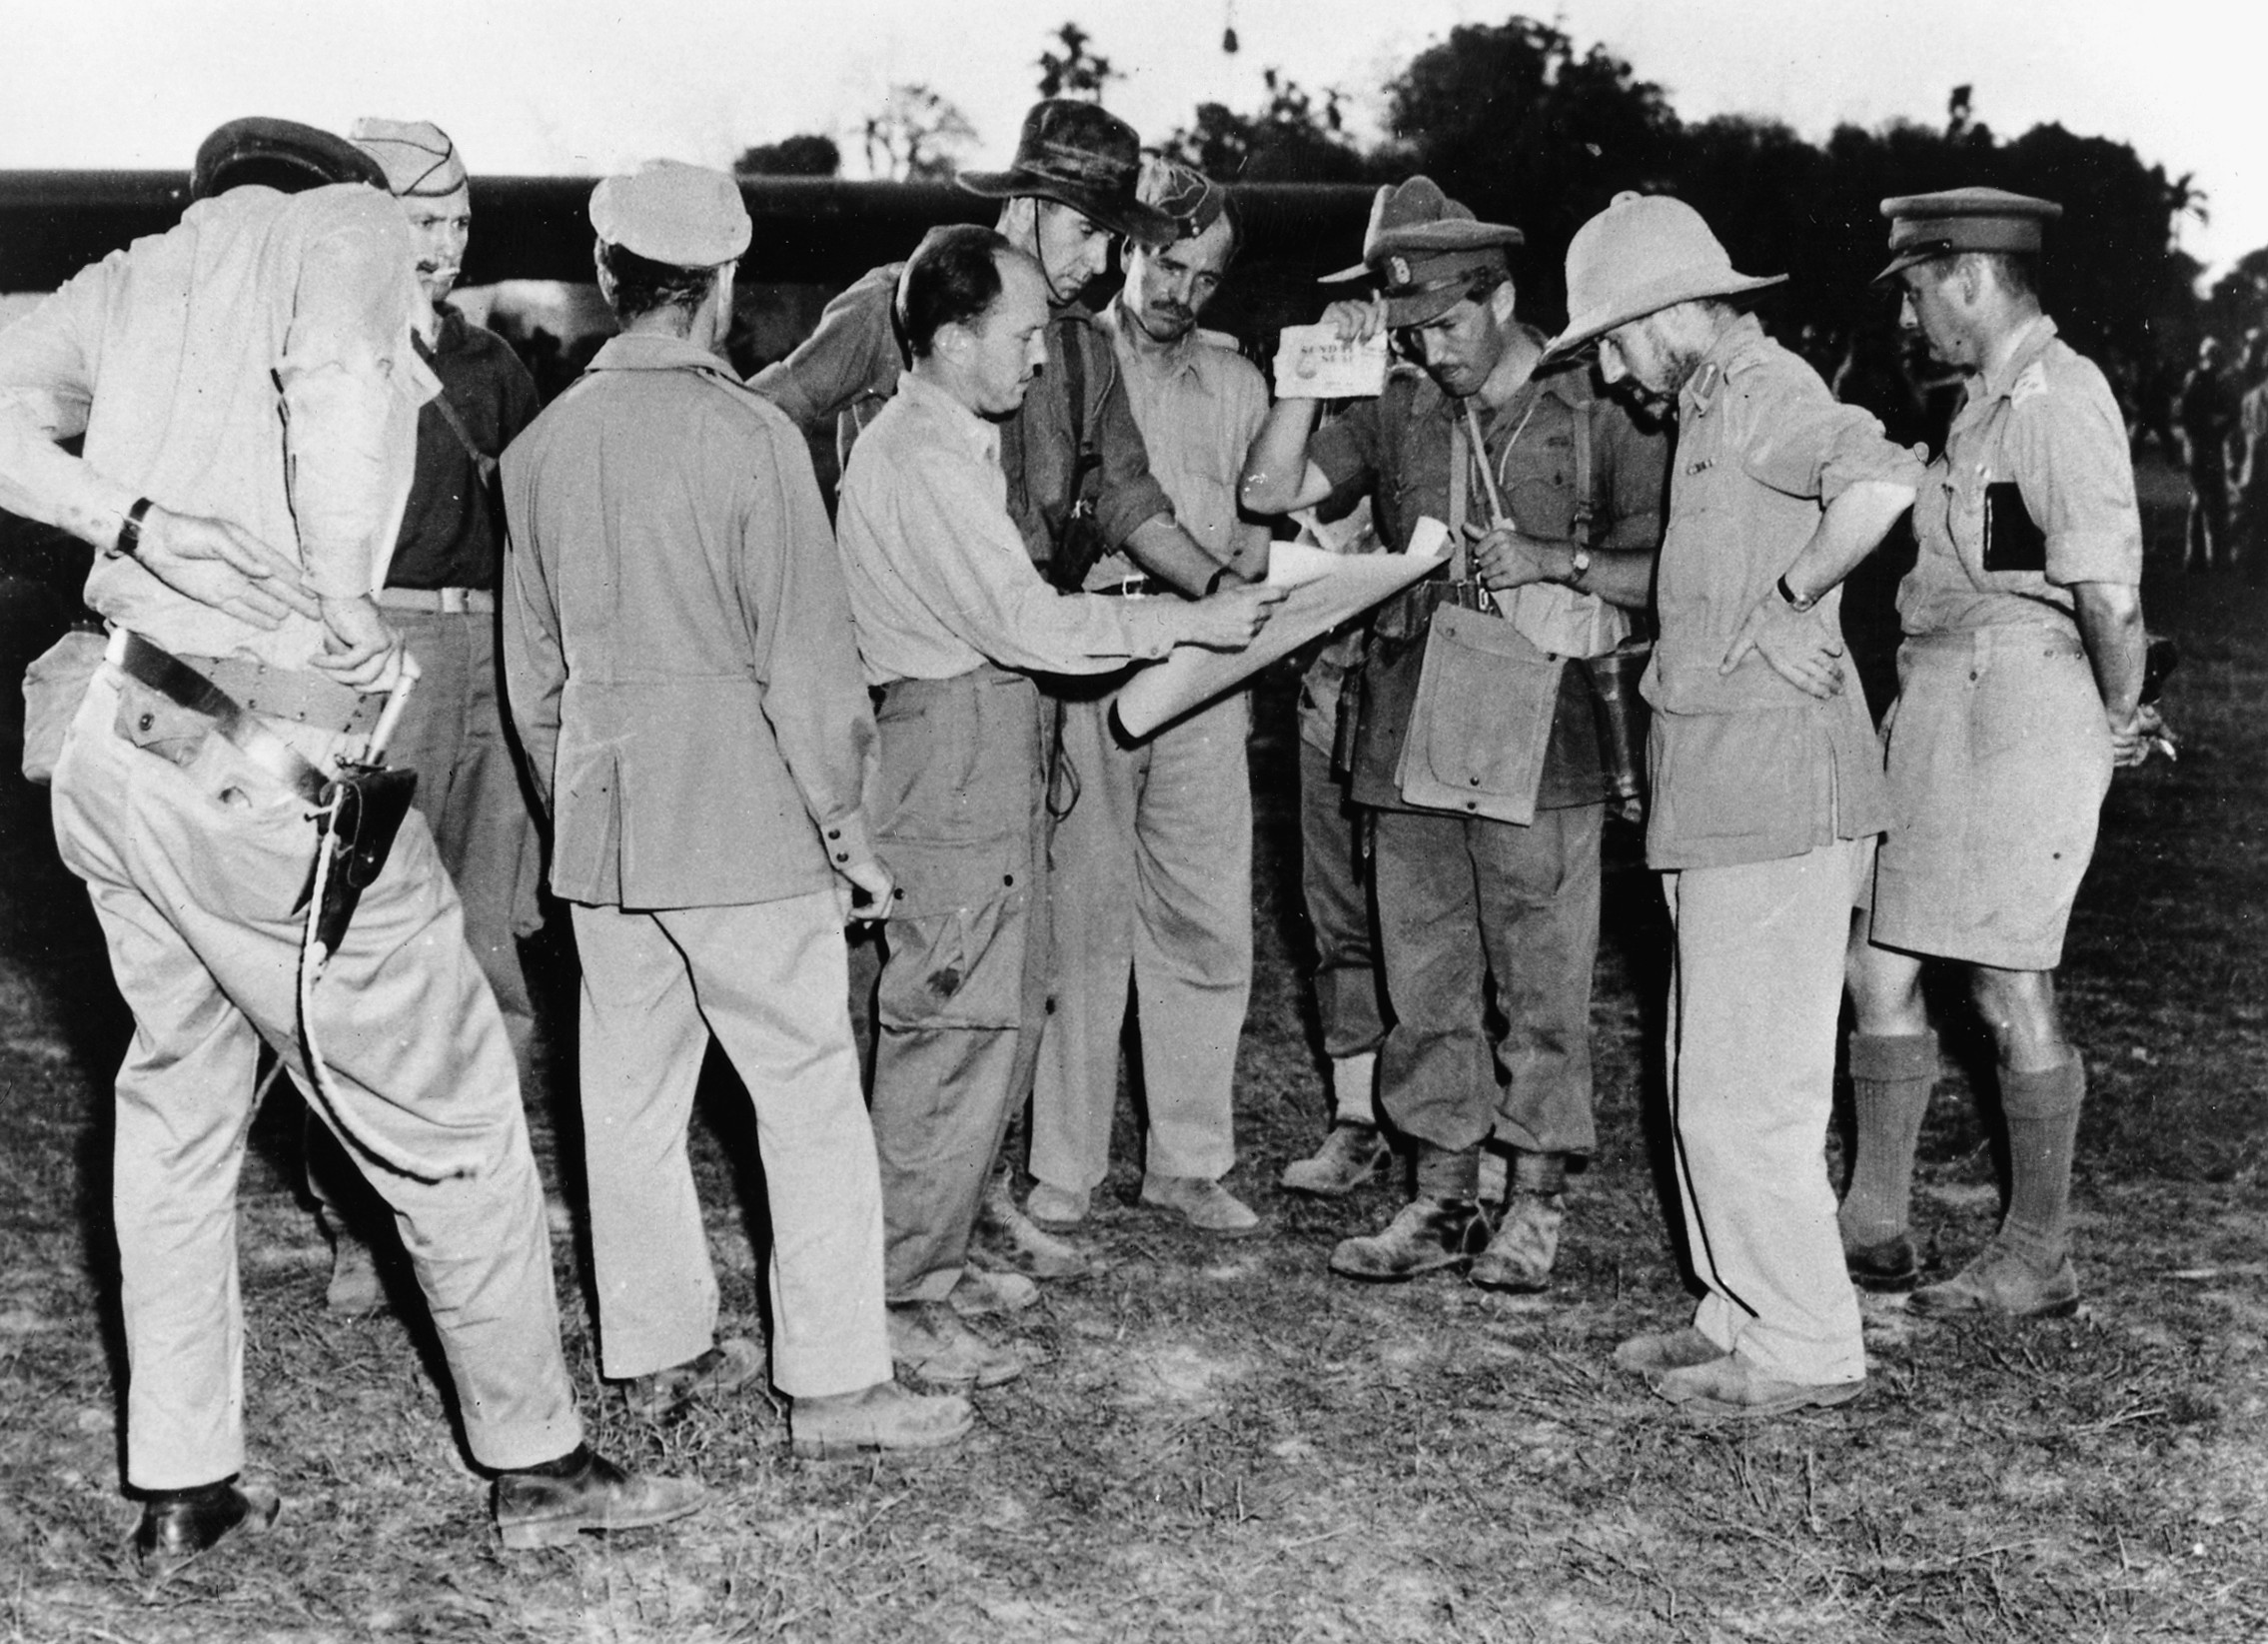 Calvert (touching the visor of his cap) and Brigadier Orde Wingate, commander of the 3rd Indian Division (second from right, in pith helmet), brief their staff officers on Operation Thursday before take-off from the main base at Sylhet, Assam, then part of India.